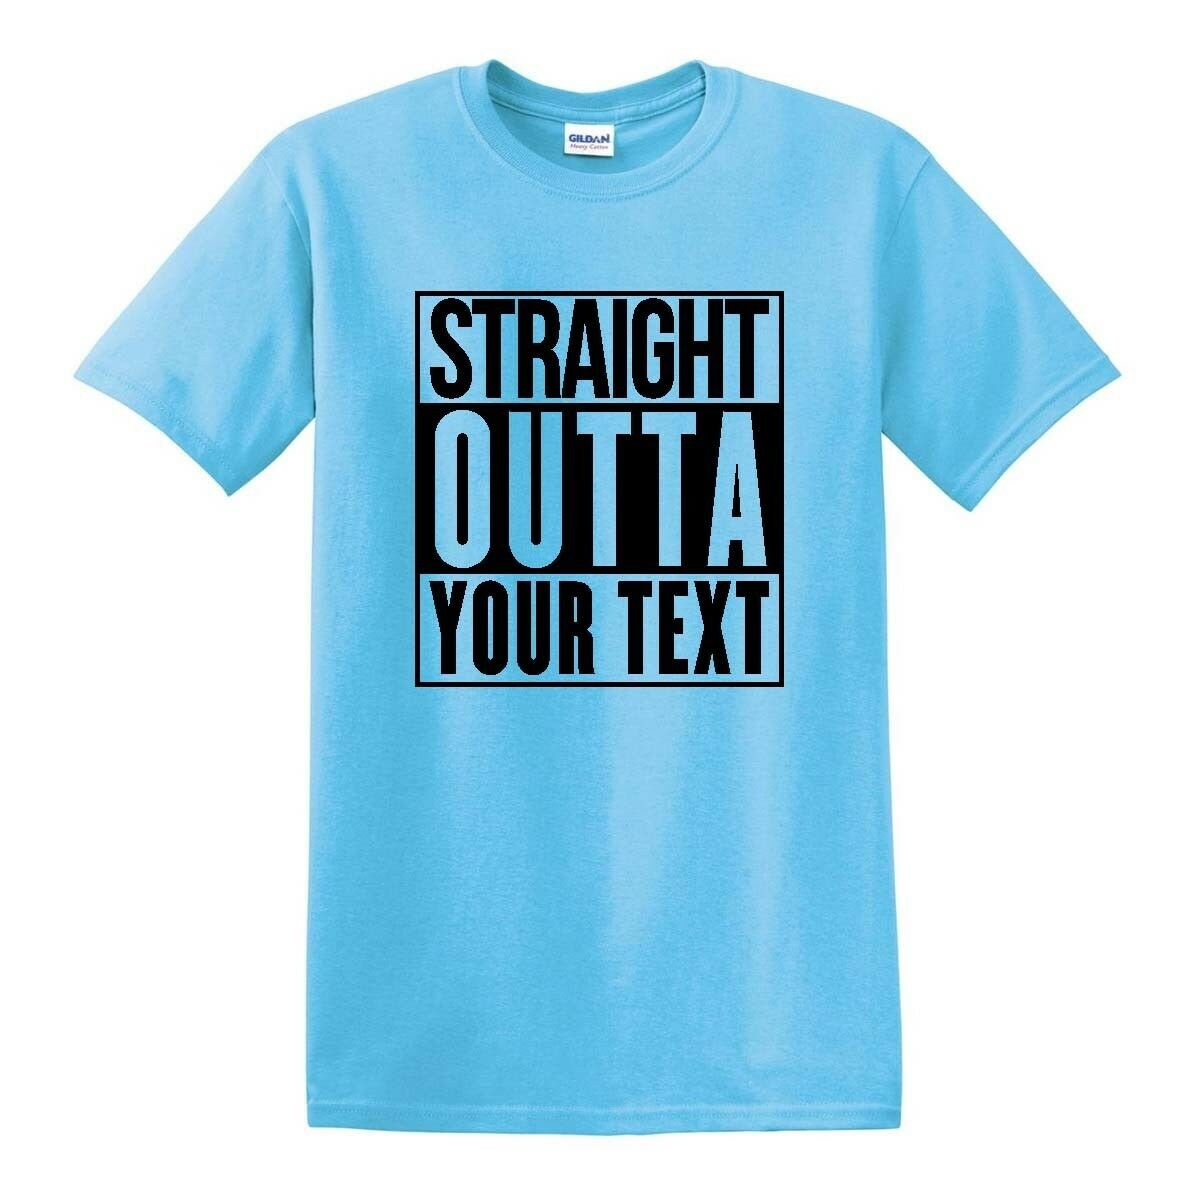 Personalized Straight Outta Your Text Compton Bottom Line T-shir sold ...